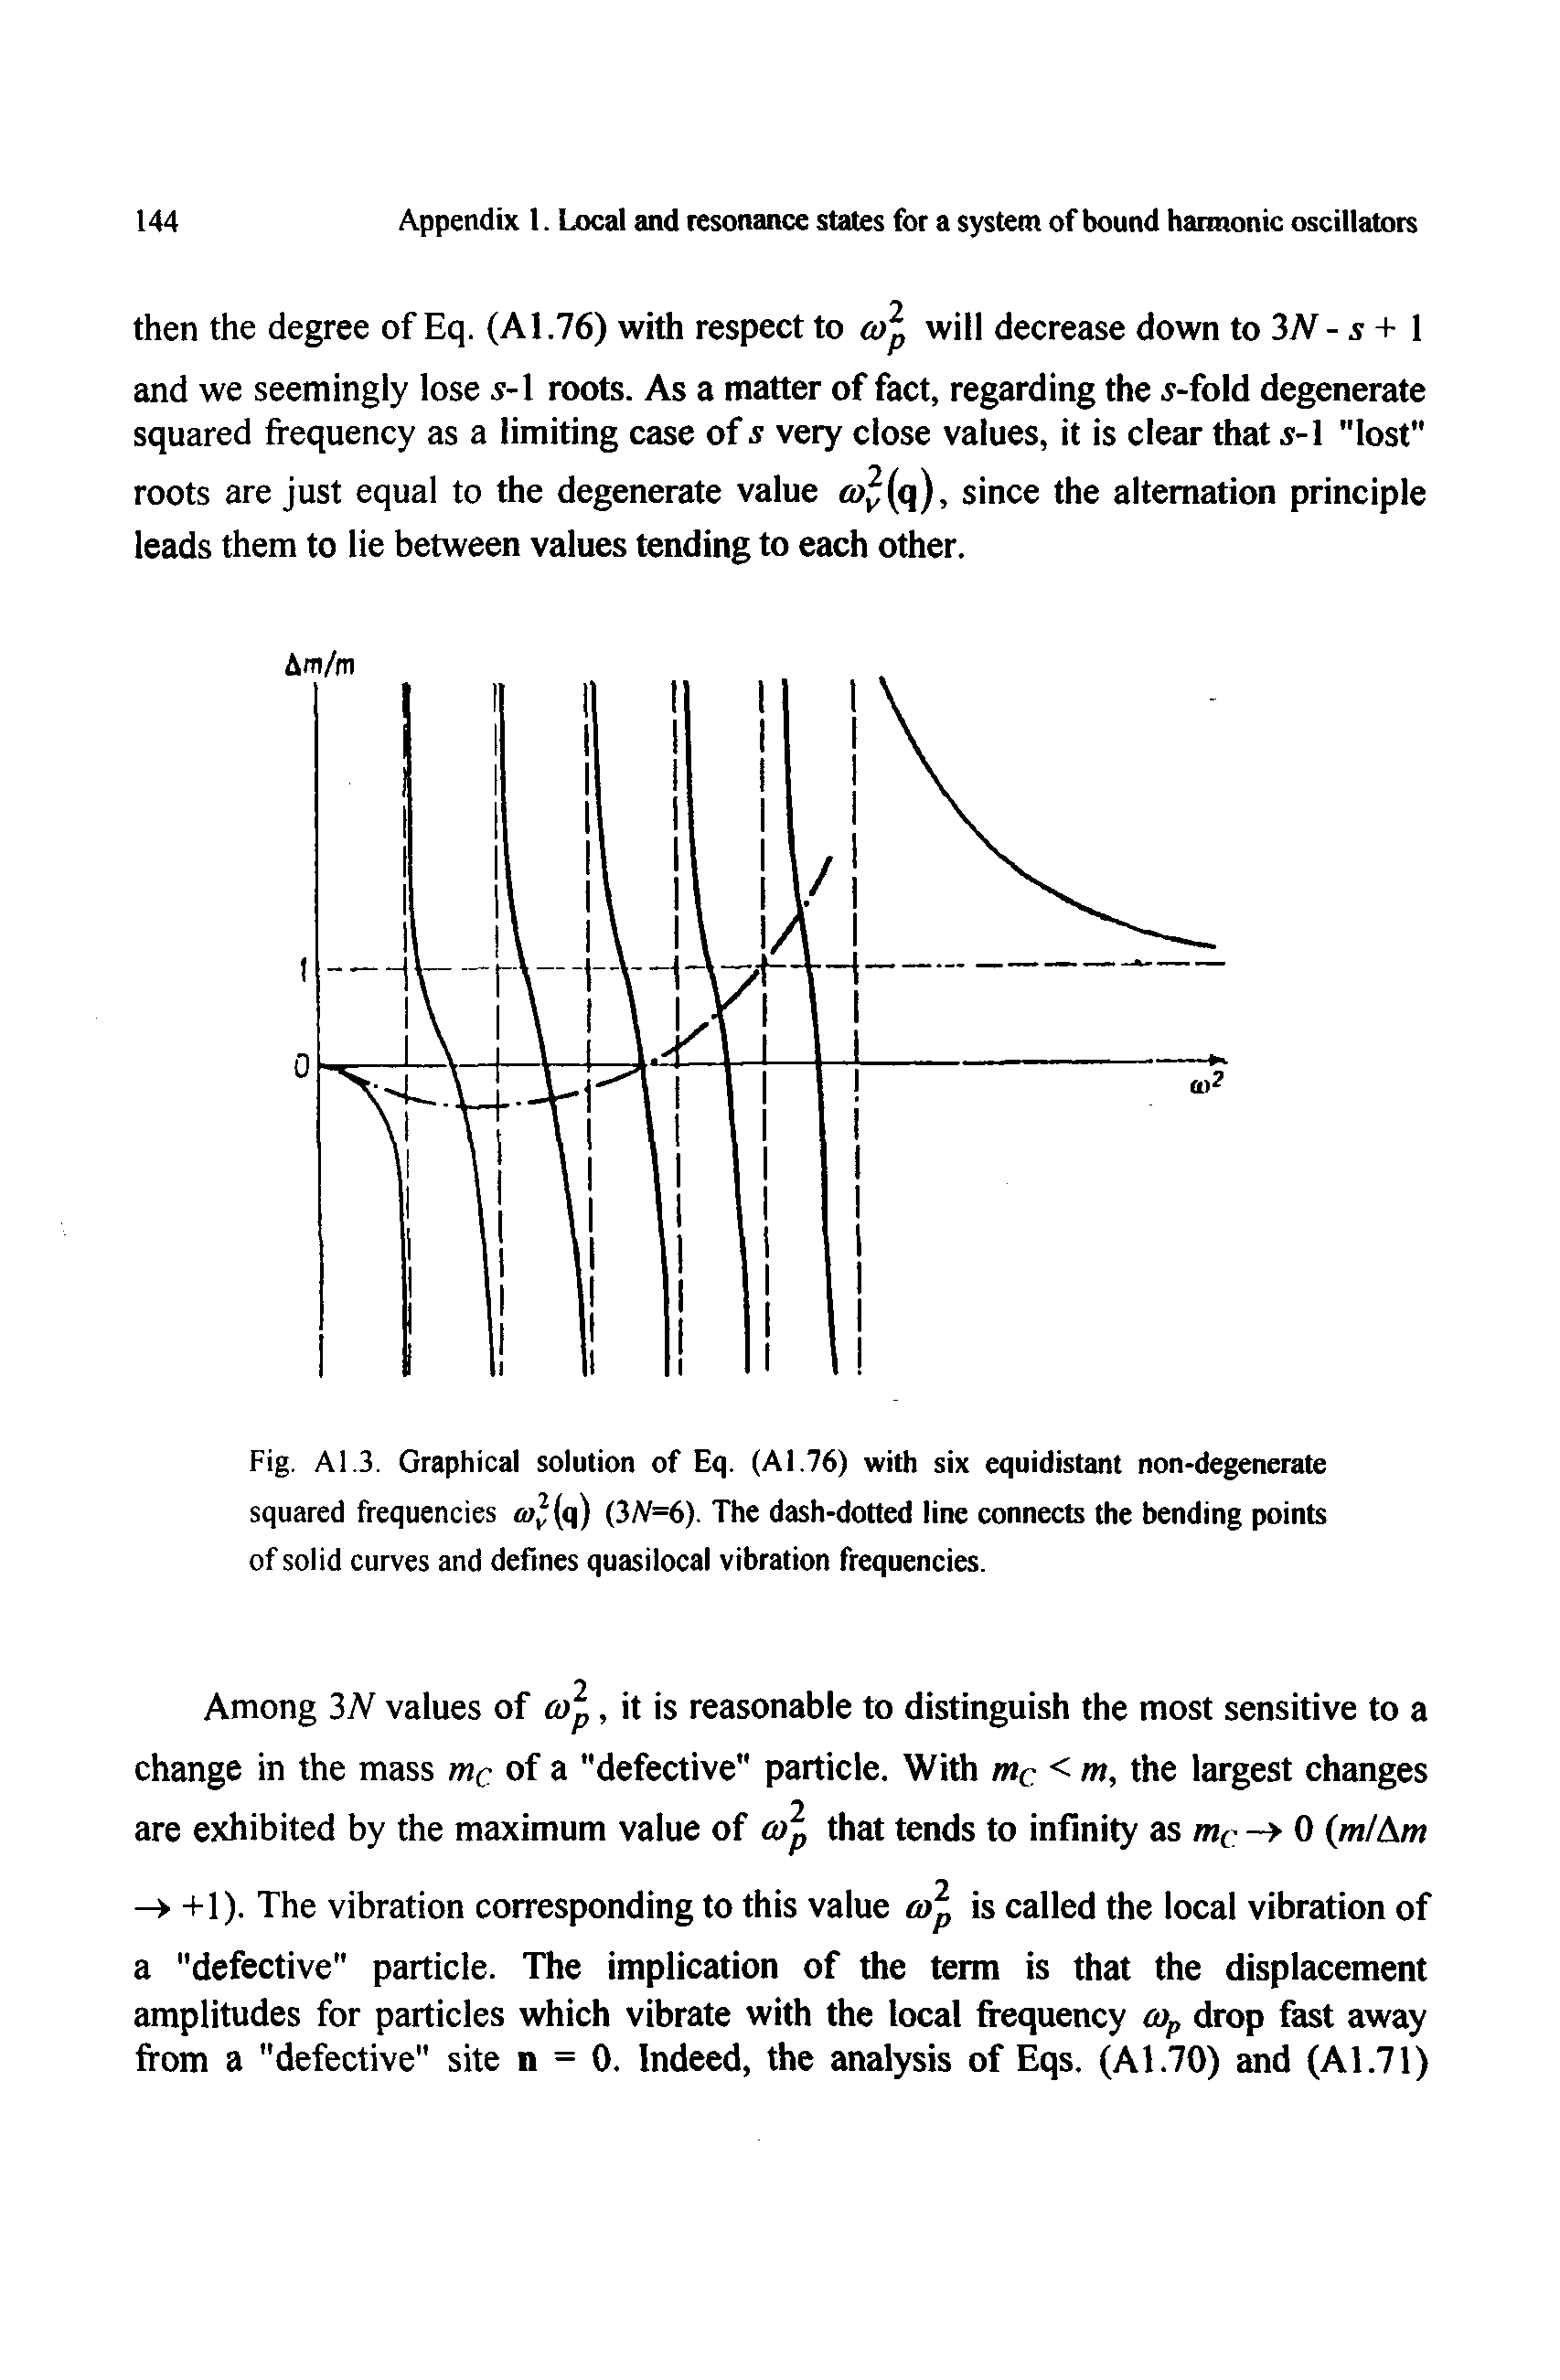 Fig. A1.3. Graphical solution of Eq. (A1.76) with six equidistant non-degenerate squared frequencies a> (q) (3/V=6). The dash-dotted line connects the bending points of solid curves and defines quasilocal vibration frequencies.